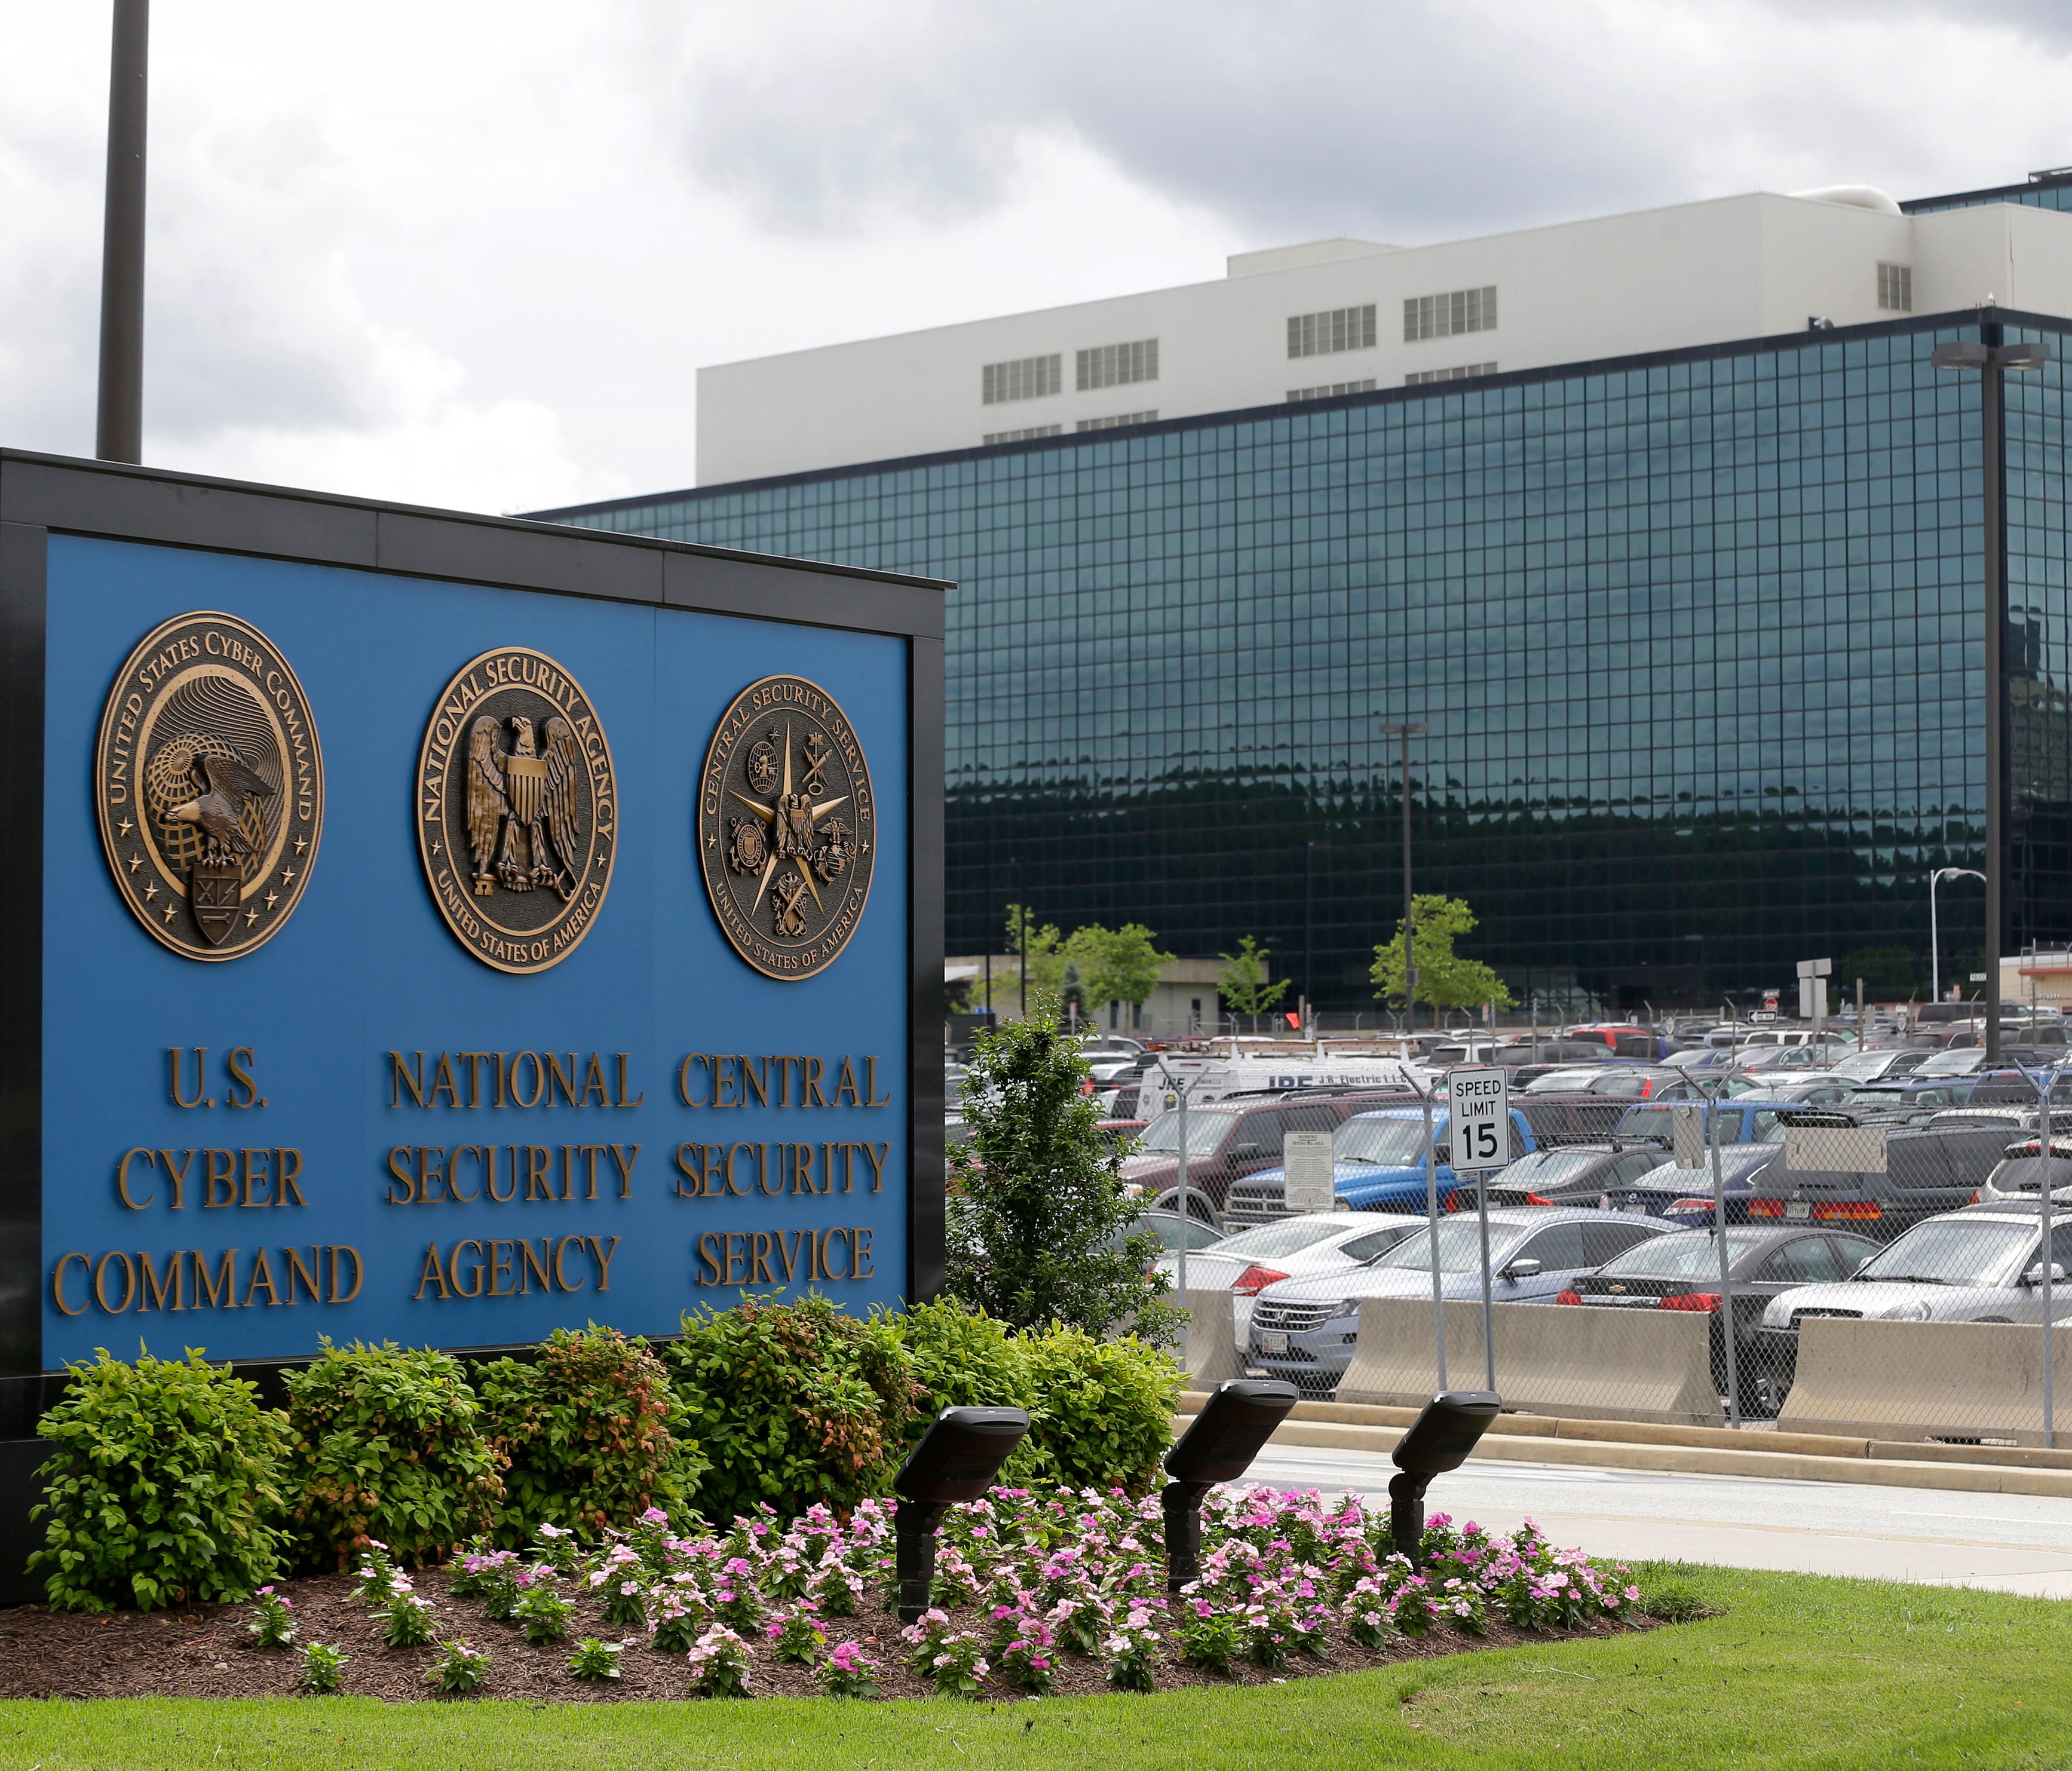 The National Security Agency campus in Fort Meade, Md.